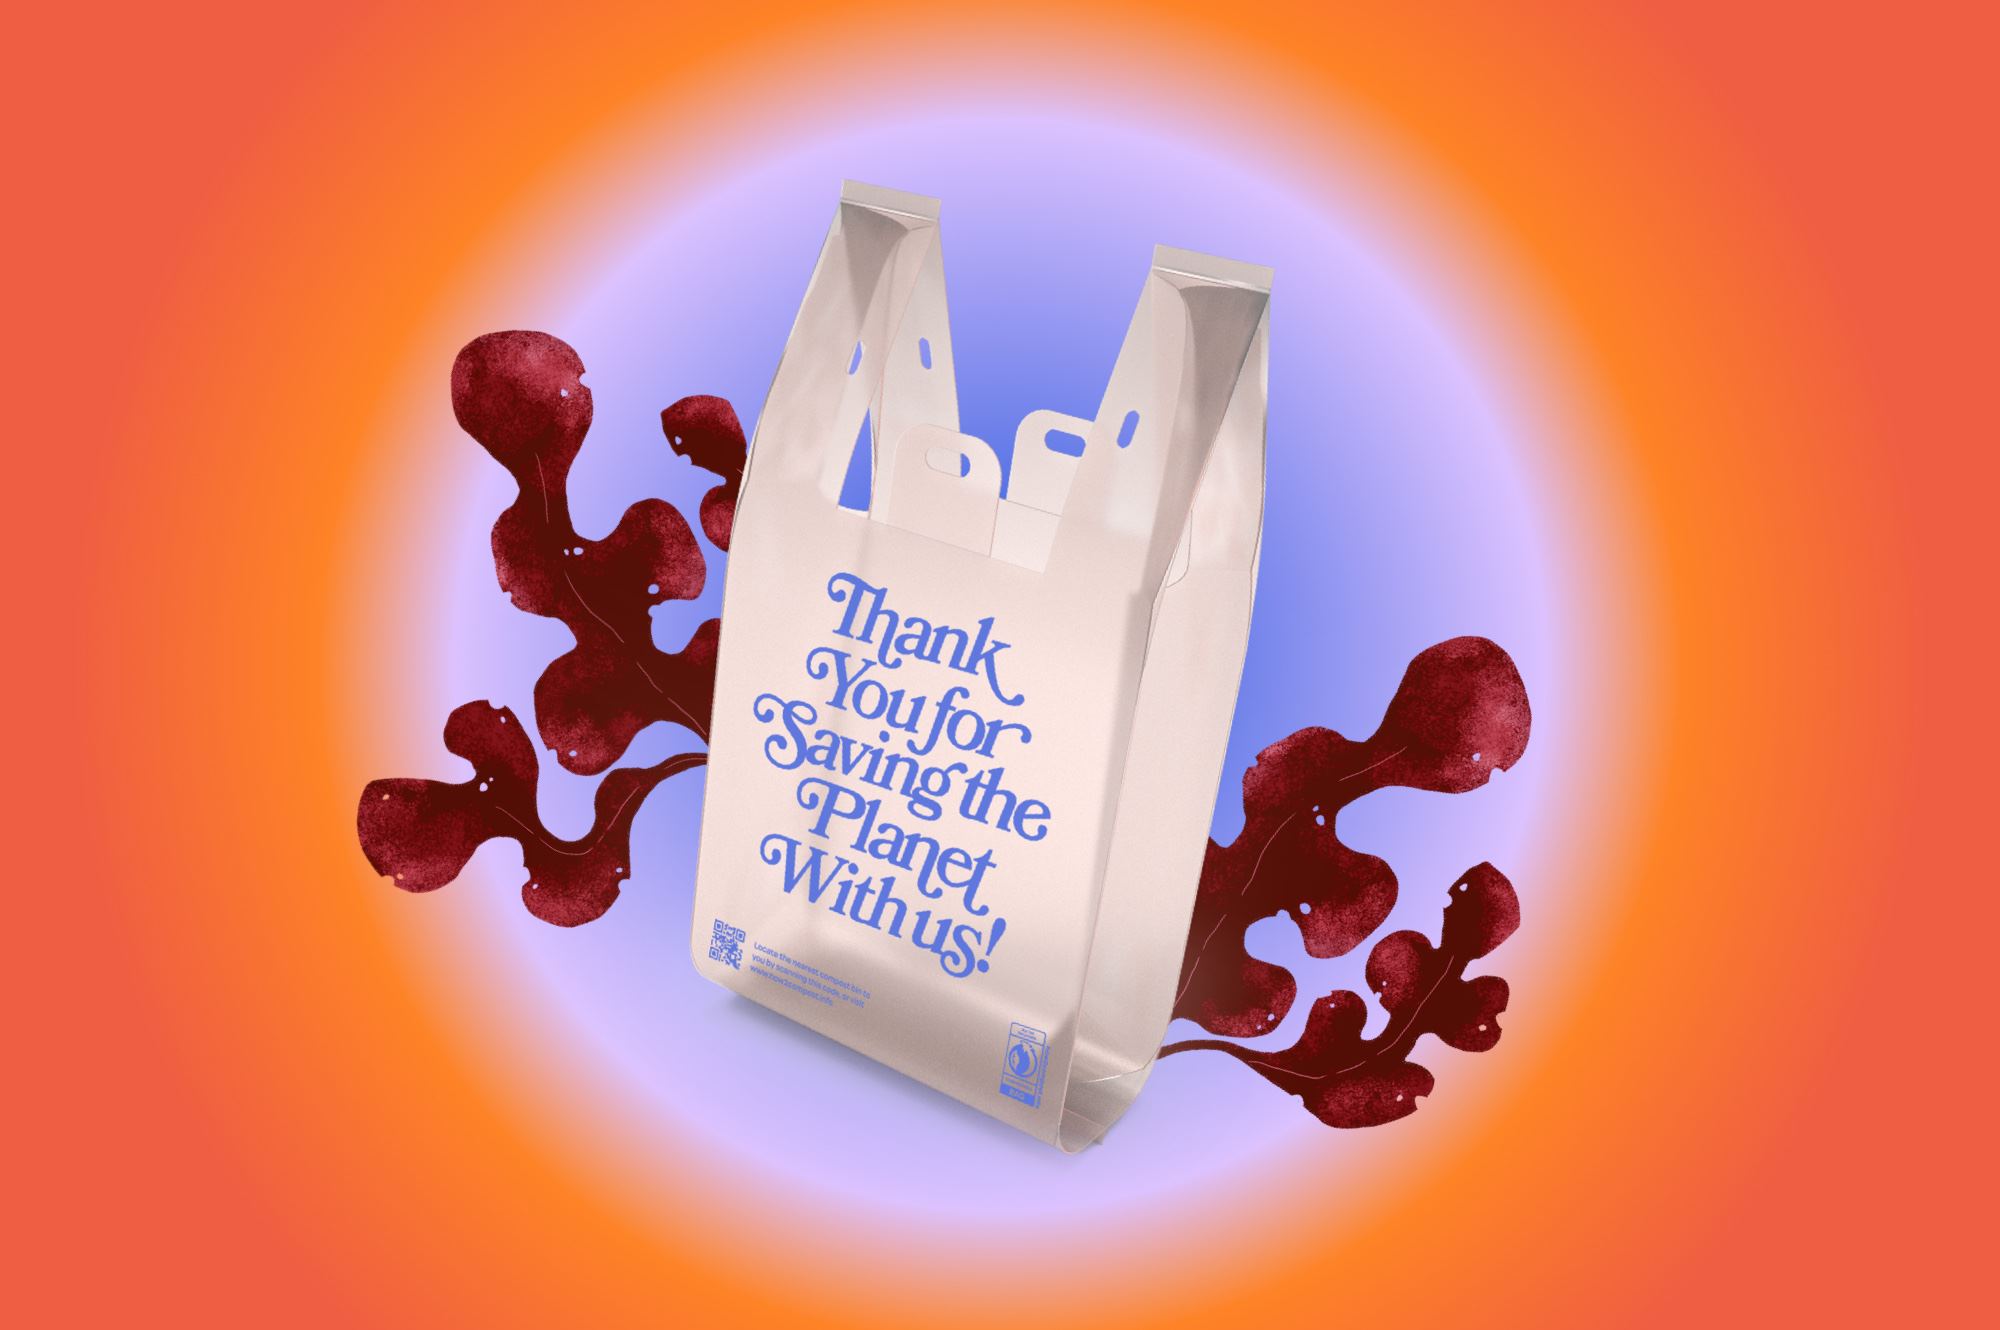 A rendering of a plastic bag alternative, with seaweed in the background. Text on the bag says "Thank You For Saving The Planet With Us